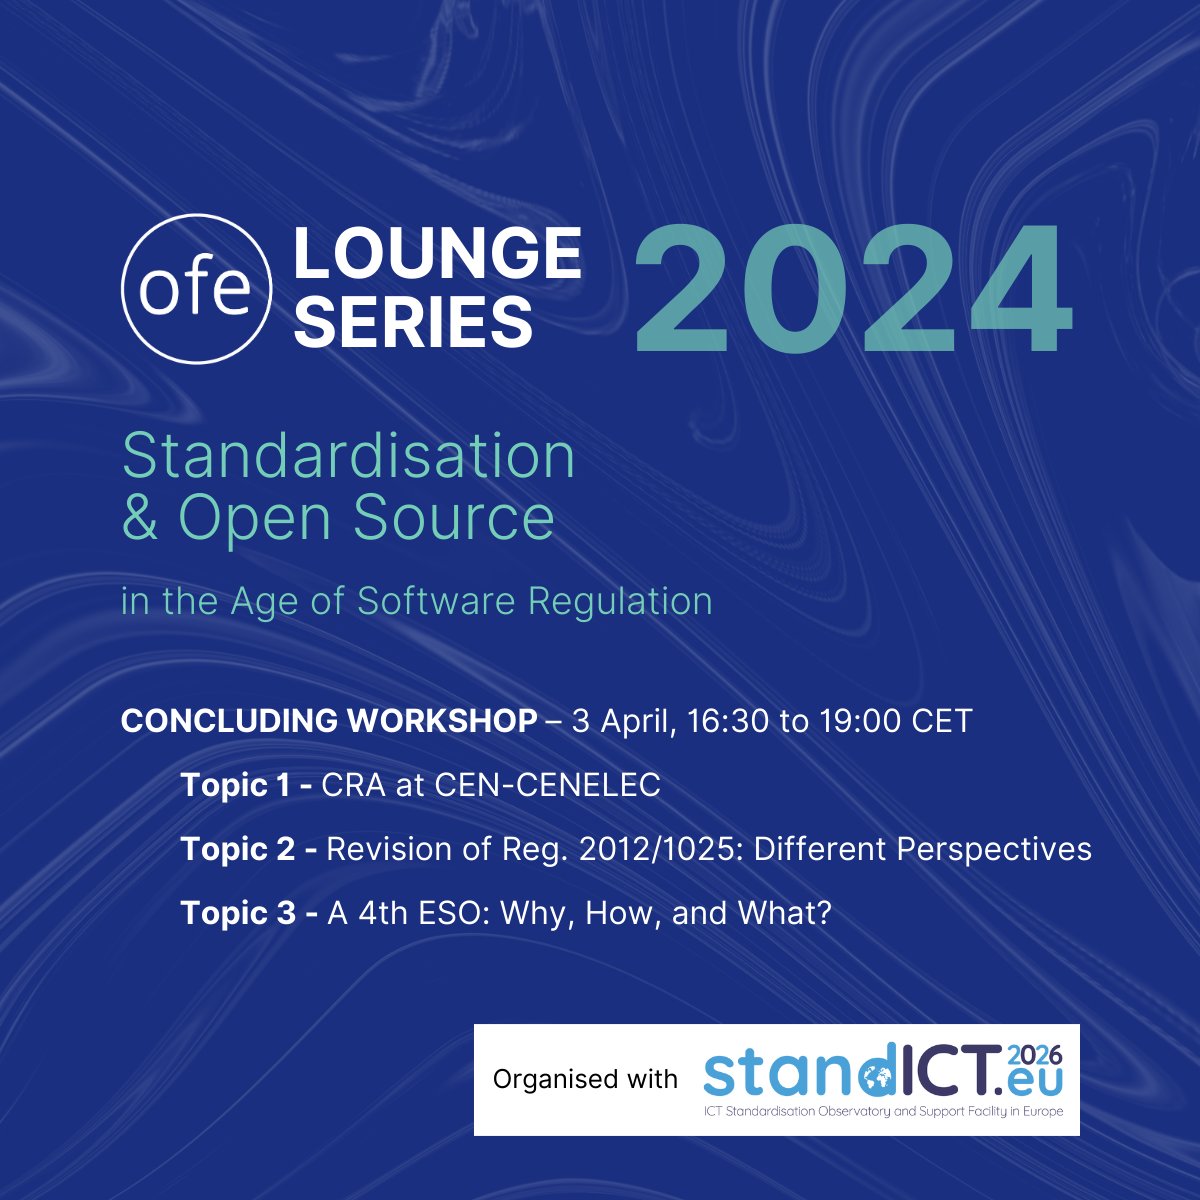 Concluding our webinar series, the final OFE Lounge workshop focuses on the future of standardization. Join us tomorrow! 📅3 April, 16:30 - 19:00 CEST 🔗openforumeurope.org/event/ofe-loun… #opensource